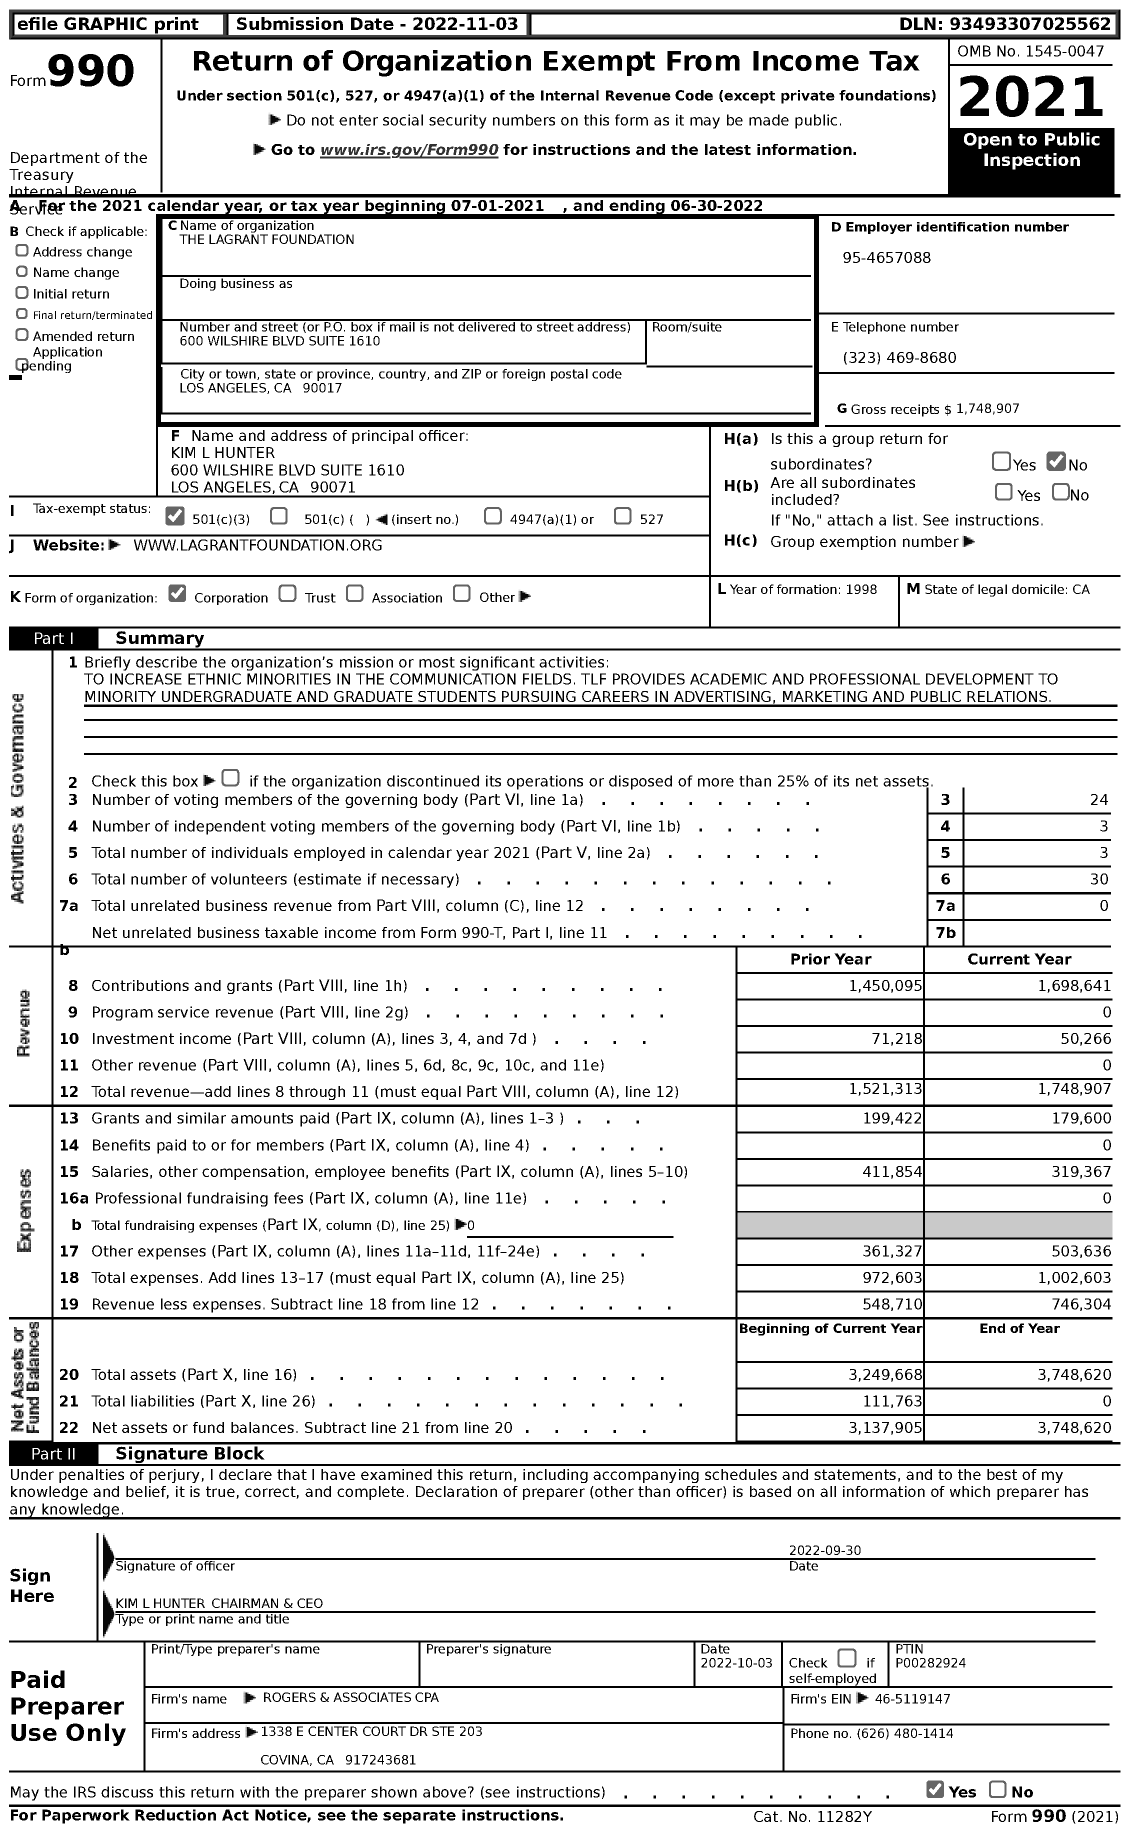 Image of first page of 2021 Form 990 for The Lagrant Foundation